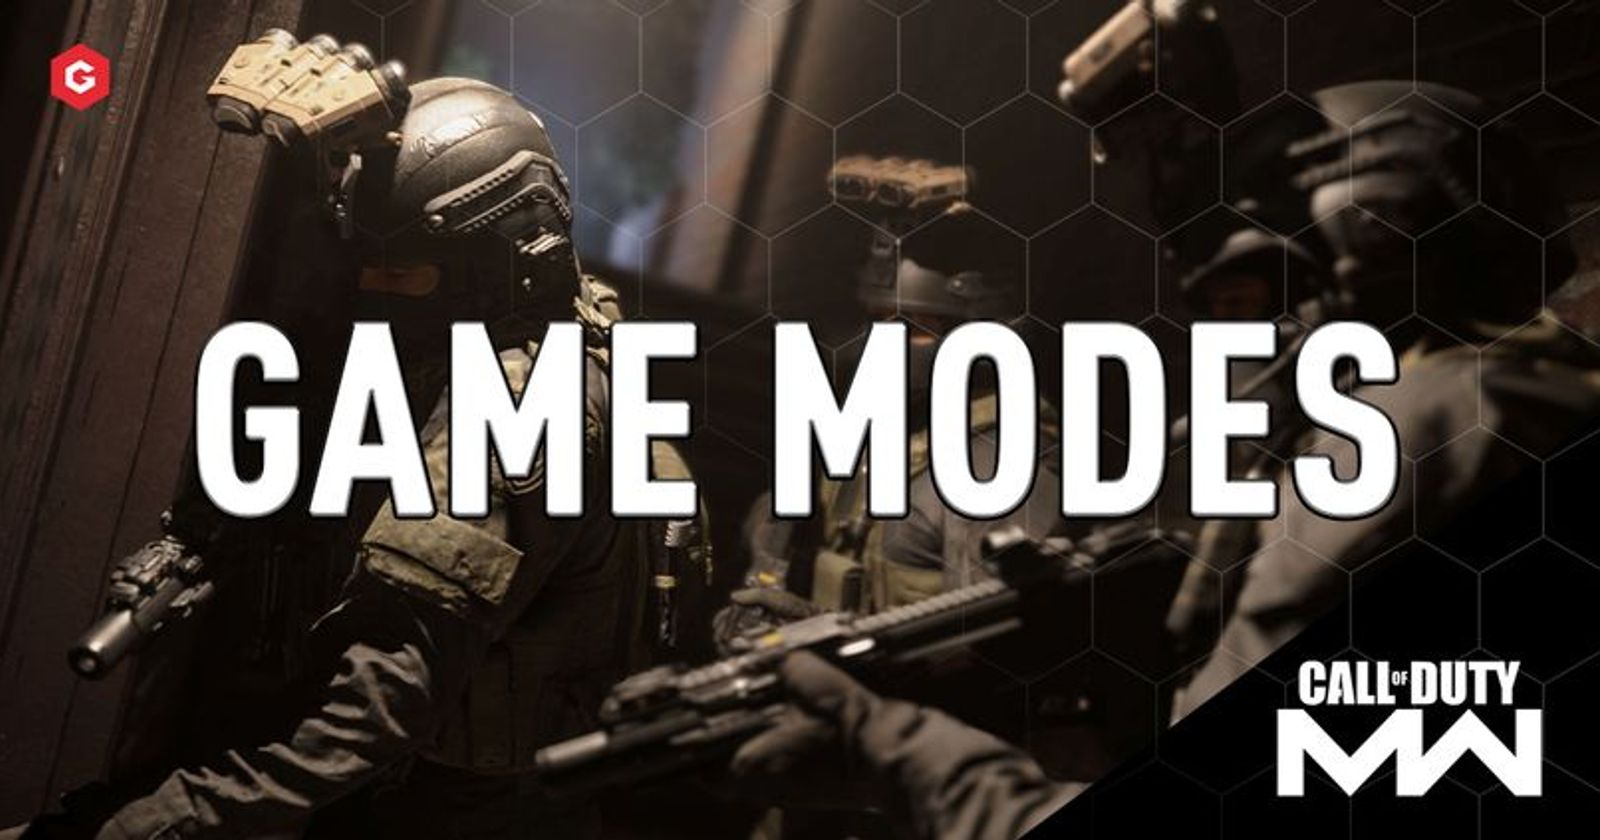 All Modes In Call of Duty Modern Warfare 2 - Domination, Ground War and More